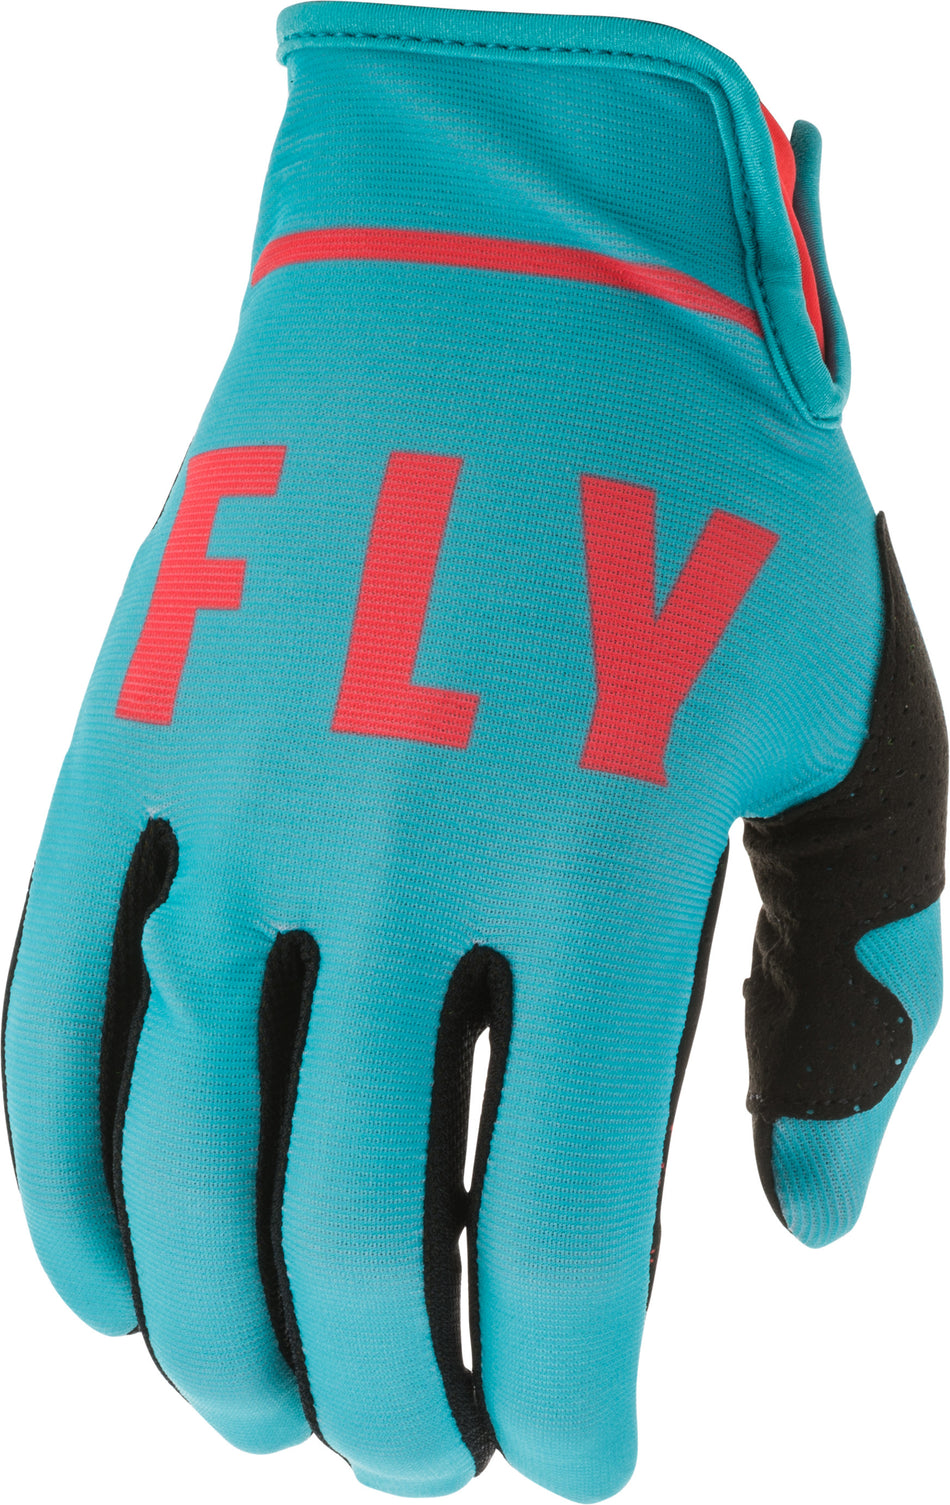 FLY RACING Lite Gloves Blue/Coral Sz 09 373-71909